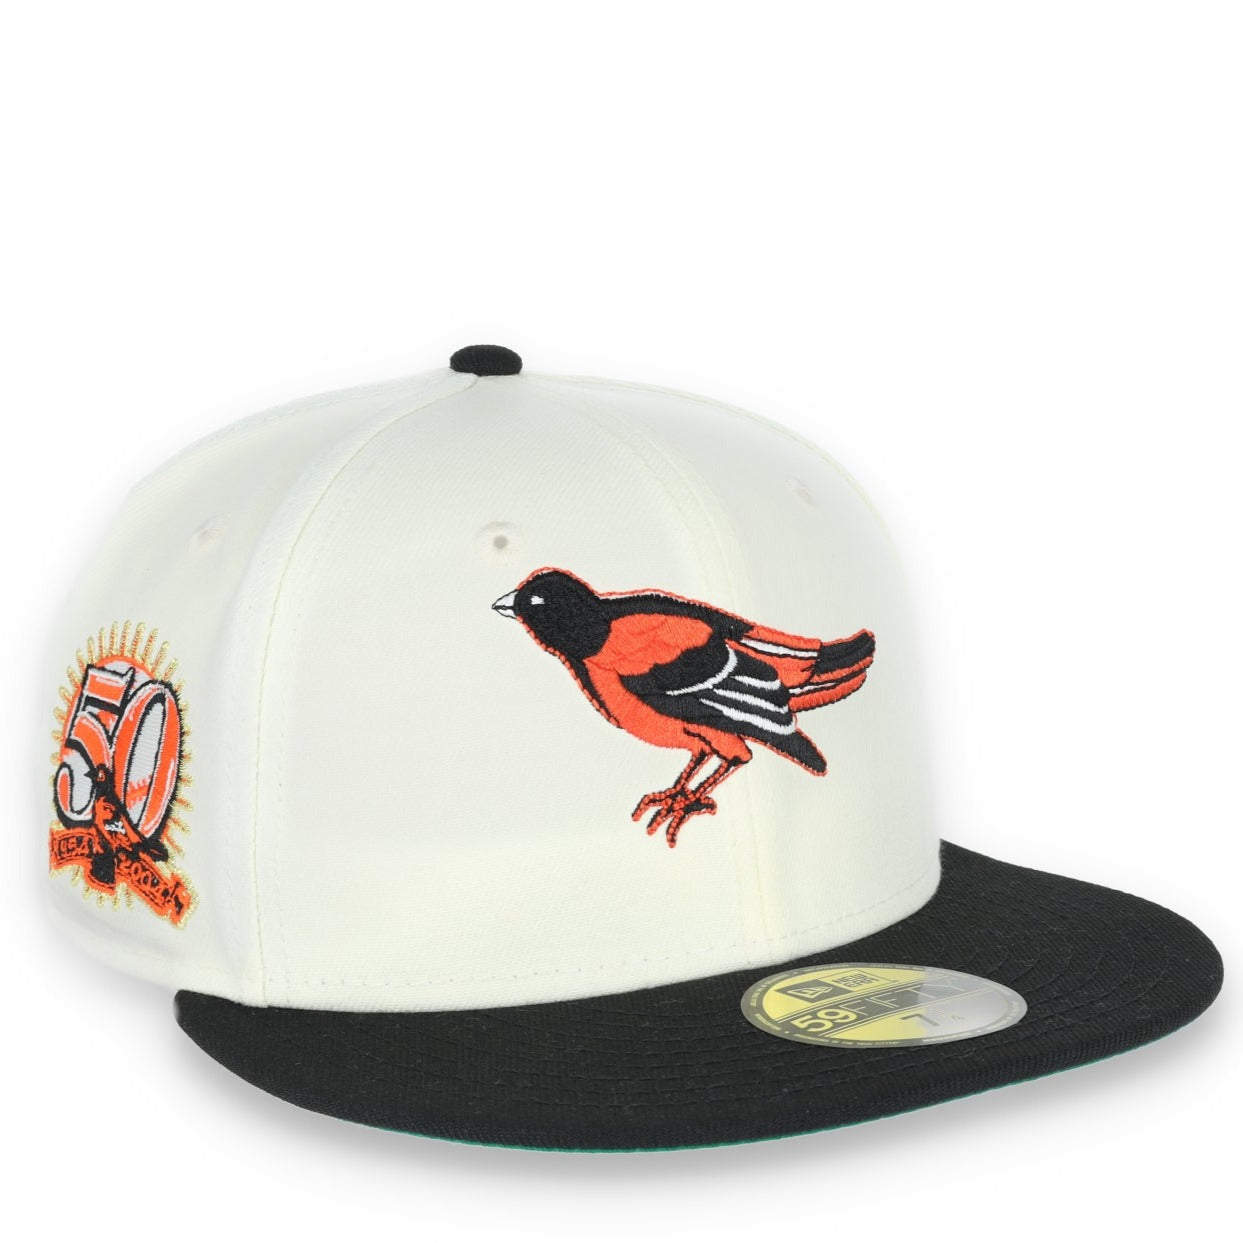 New Era Baltimore Orioles 50th Anniversary Patch 59FIFTY Fitted Ivory Hat